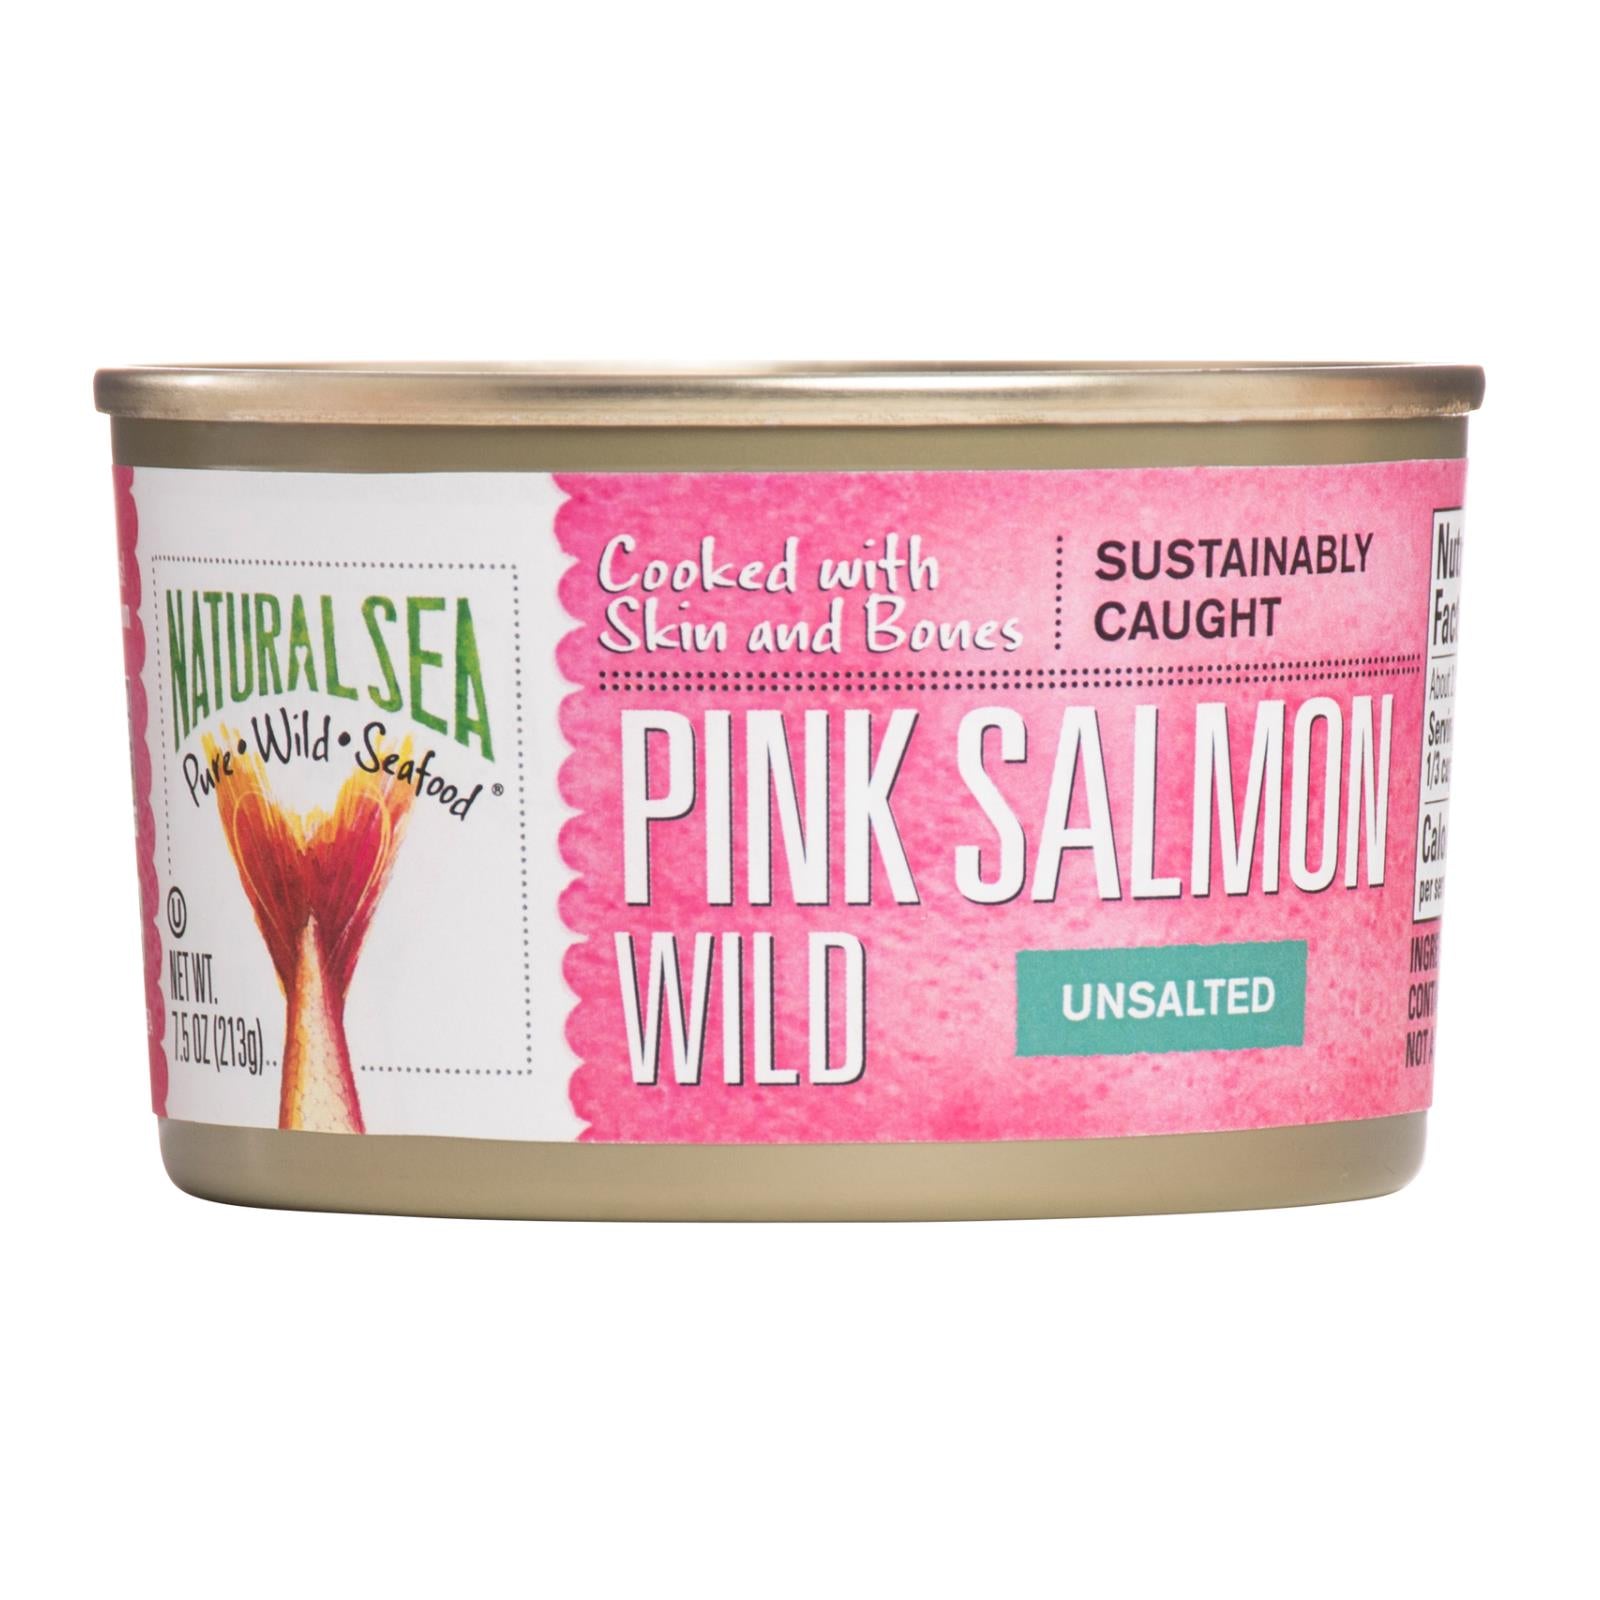 Natural Sea Wild Pink Salmon, Unsalted - Case of 12 - 7.5 OZ